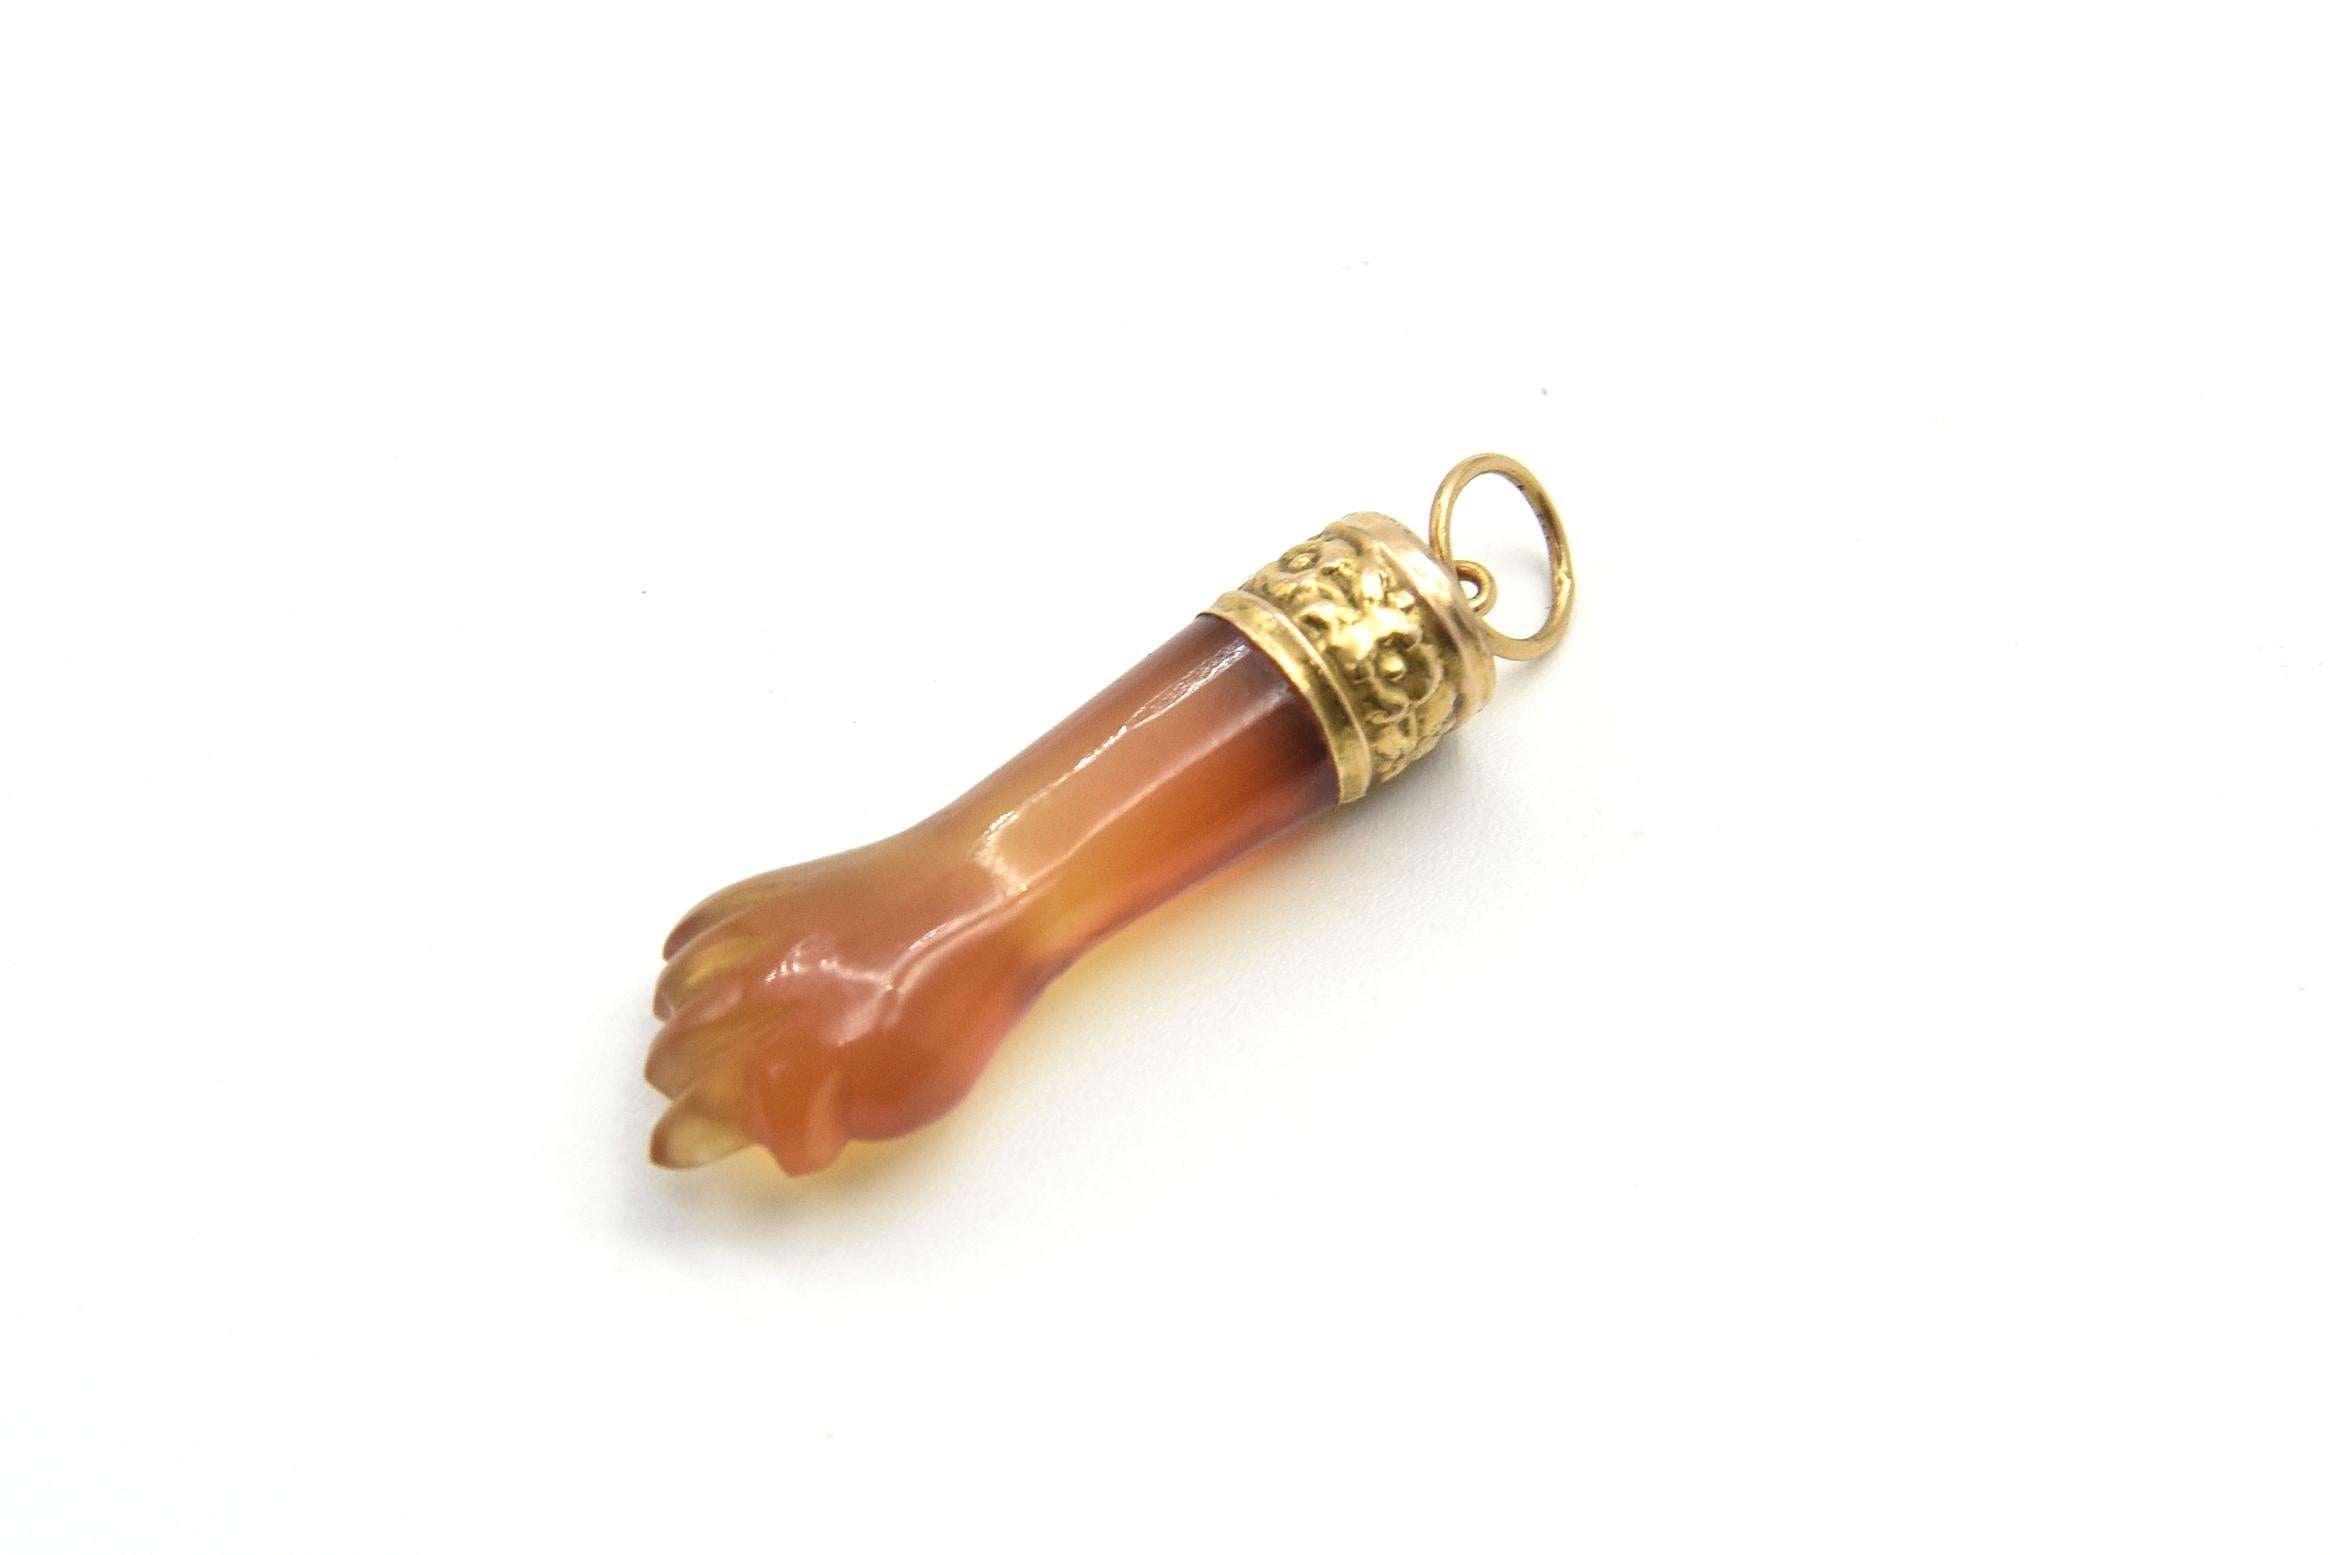 Vintage carnelian agate figa hand charm hanging from a beautiful 14k yellow gold floral cuff bracelet cap. Length with out the ring is 1.61